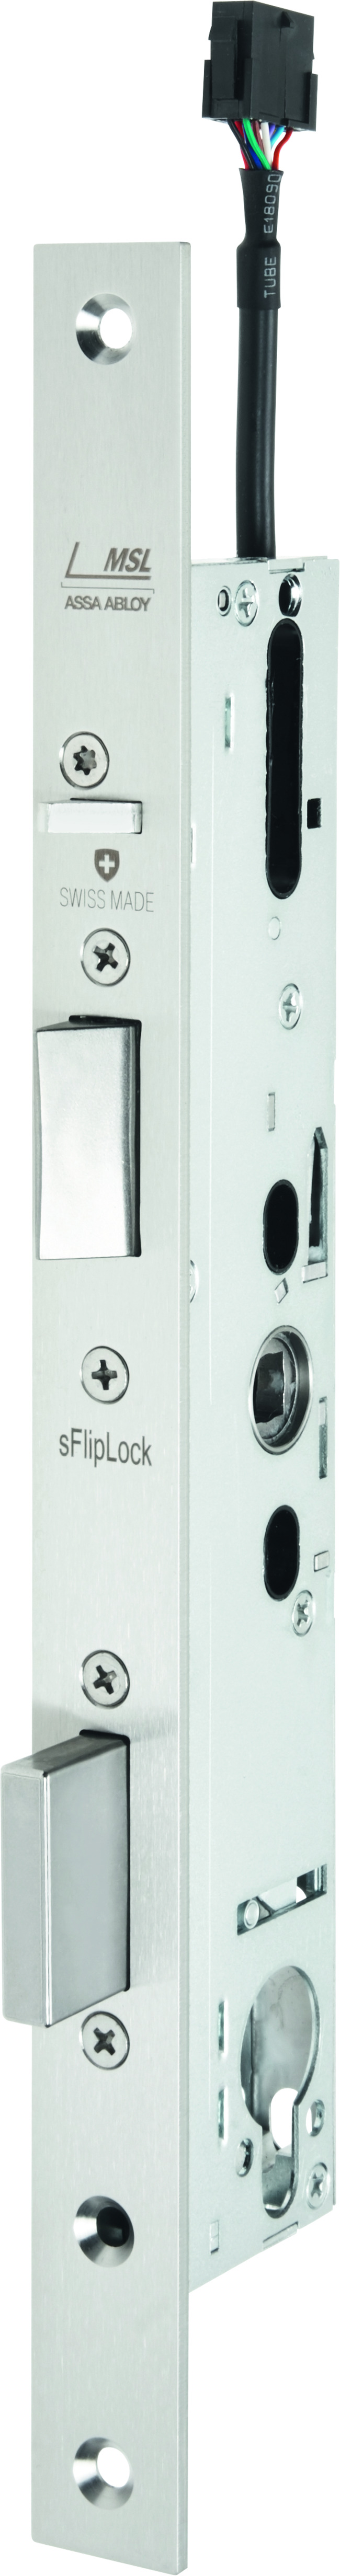 Panic security mortise lock with contacts and panic function B, outwards opening 14471